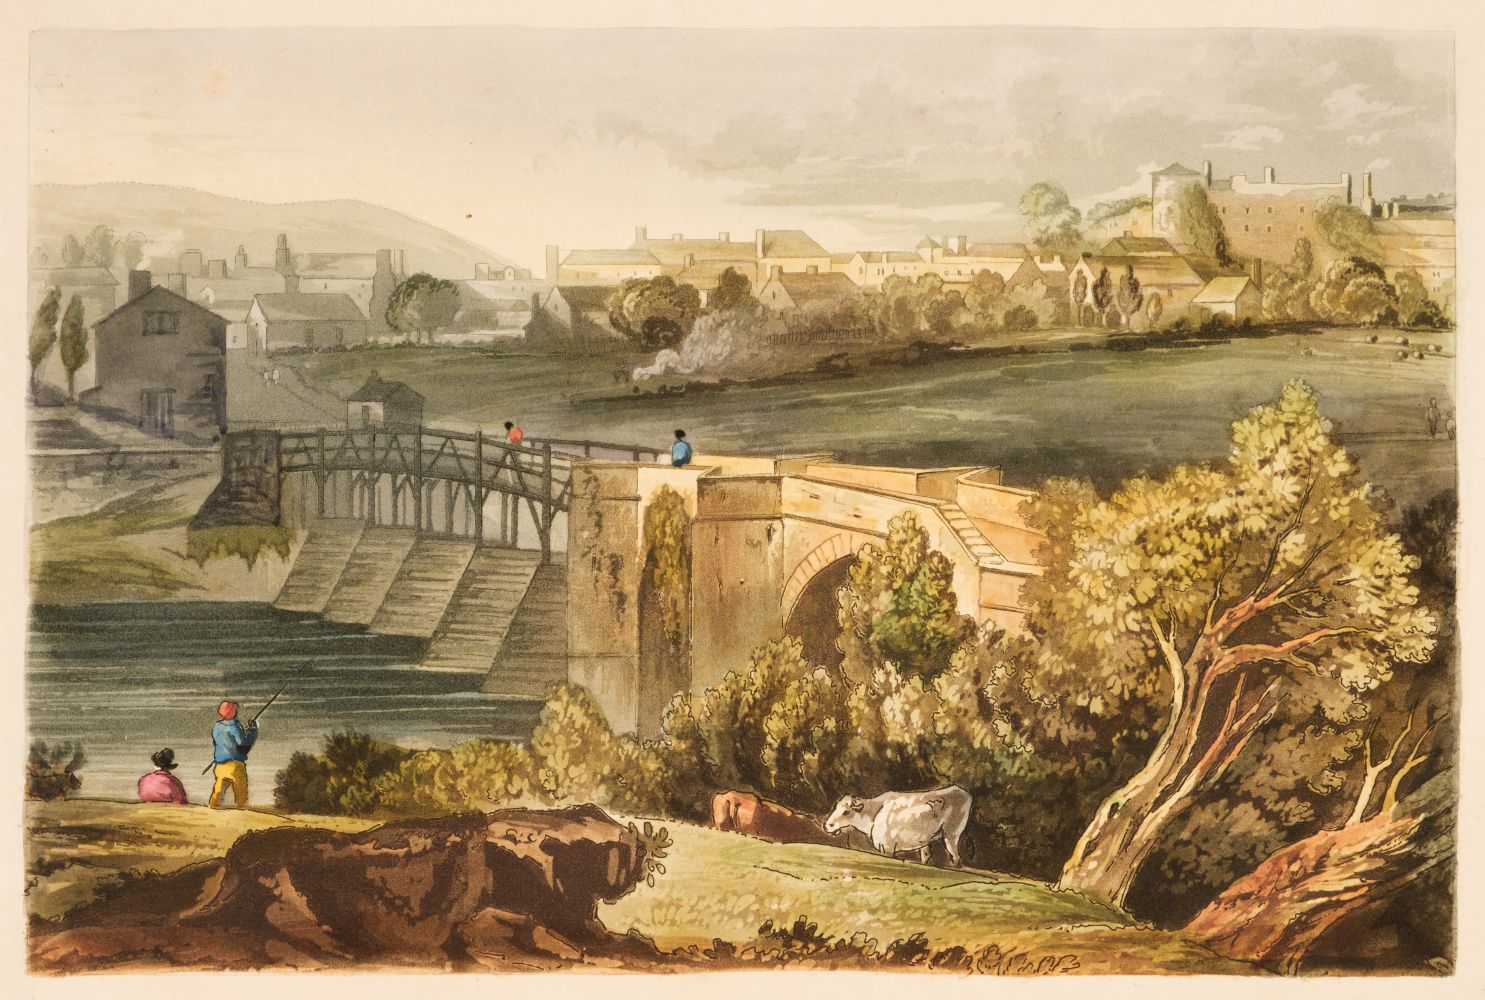 Fielding (Theodore Henry). A Picturesque Description of the River Wye, 1841